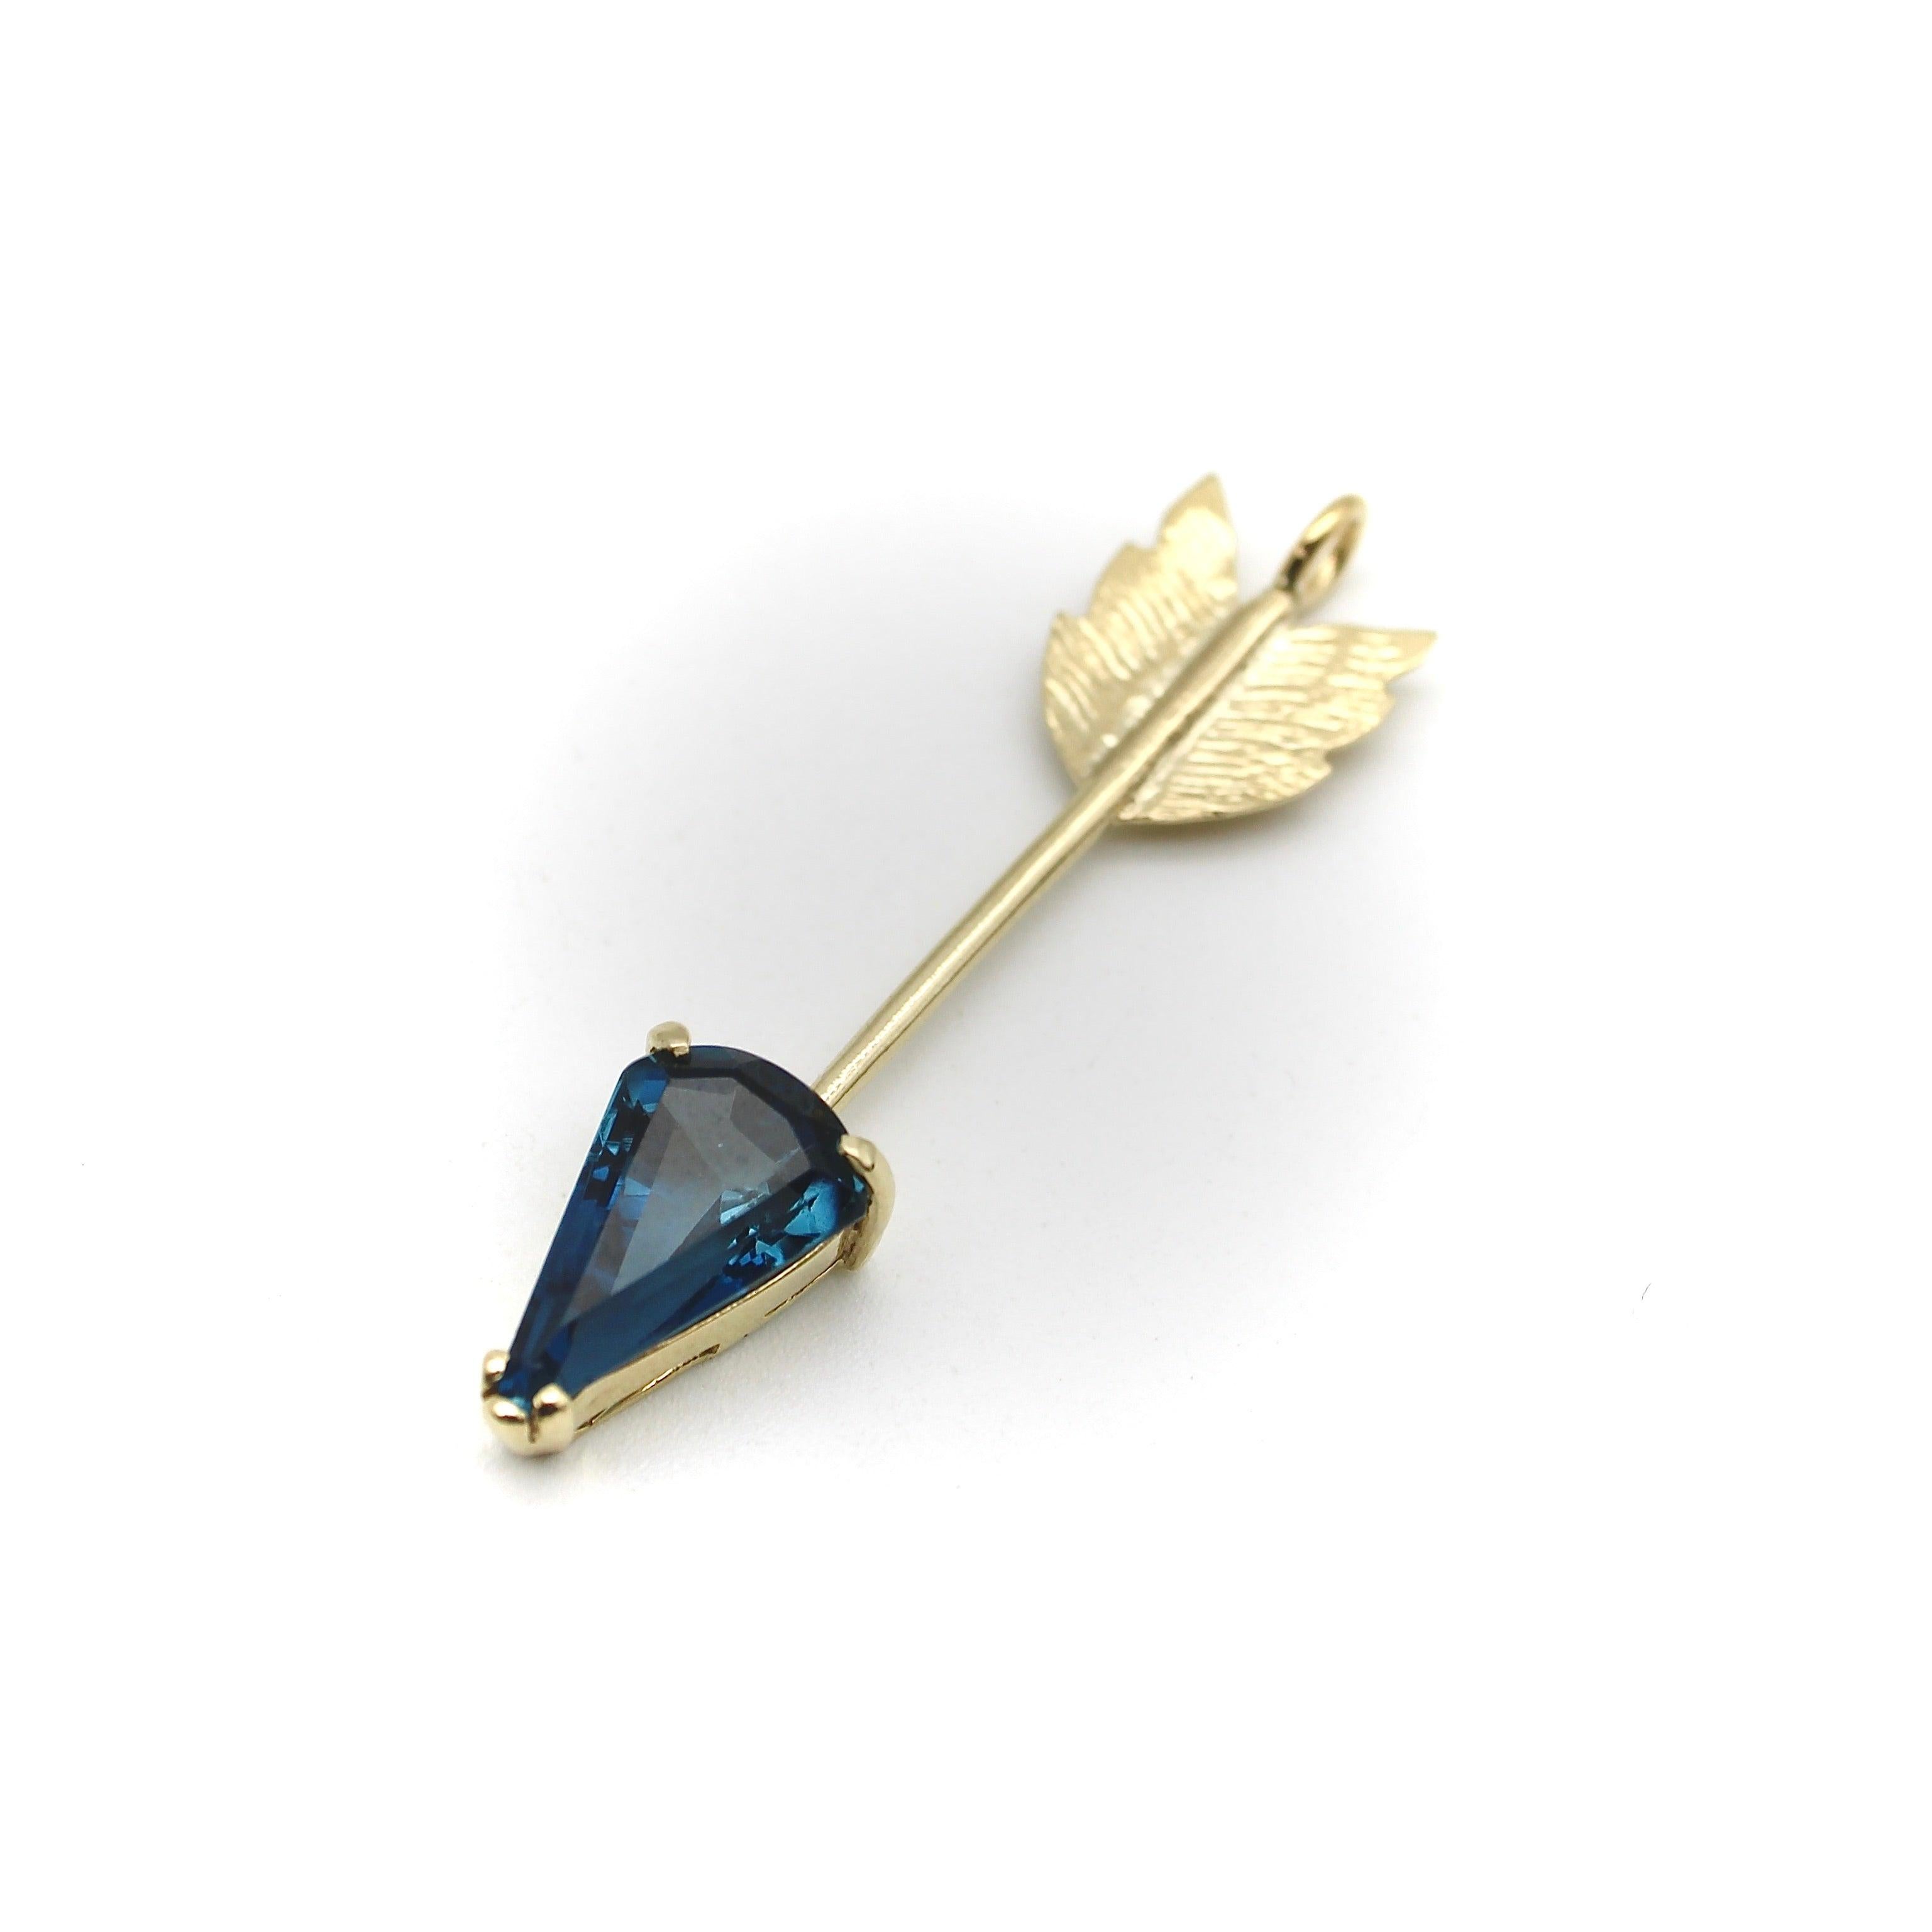 This gorgeous 14K gold arrow features a luminous London Blue Topaz. This signature piece was inspired by the arrows of martyrdom of Saint Sebastian. An iconic figure, he was ordered to be killed by the Roman emperor Diocletian. He was persecuted and